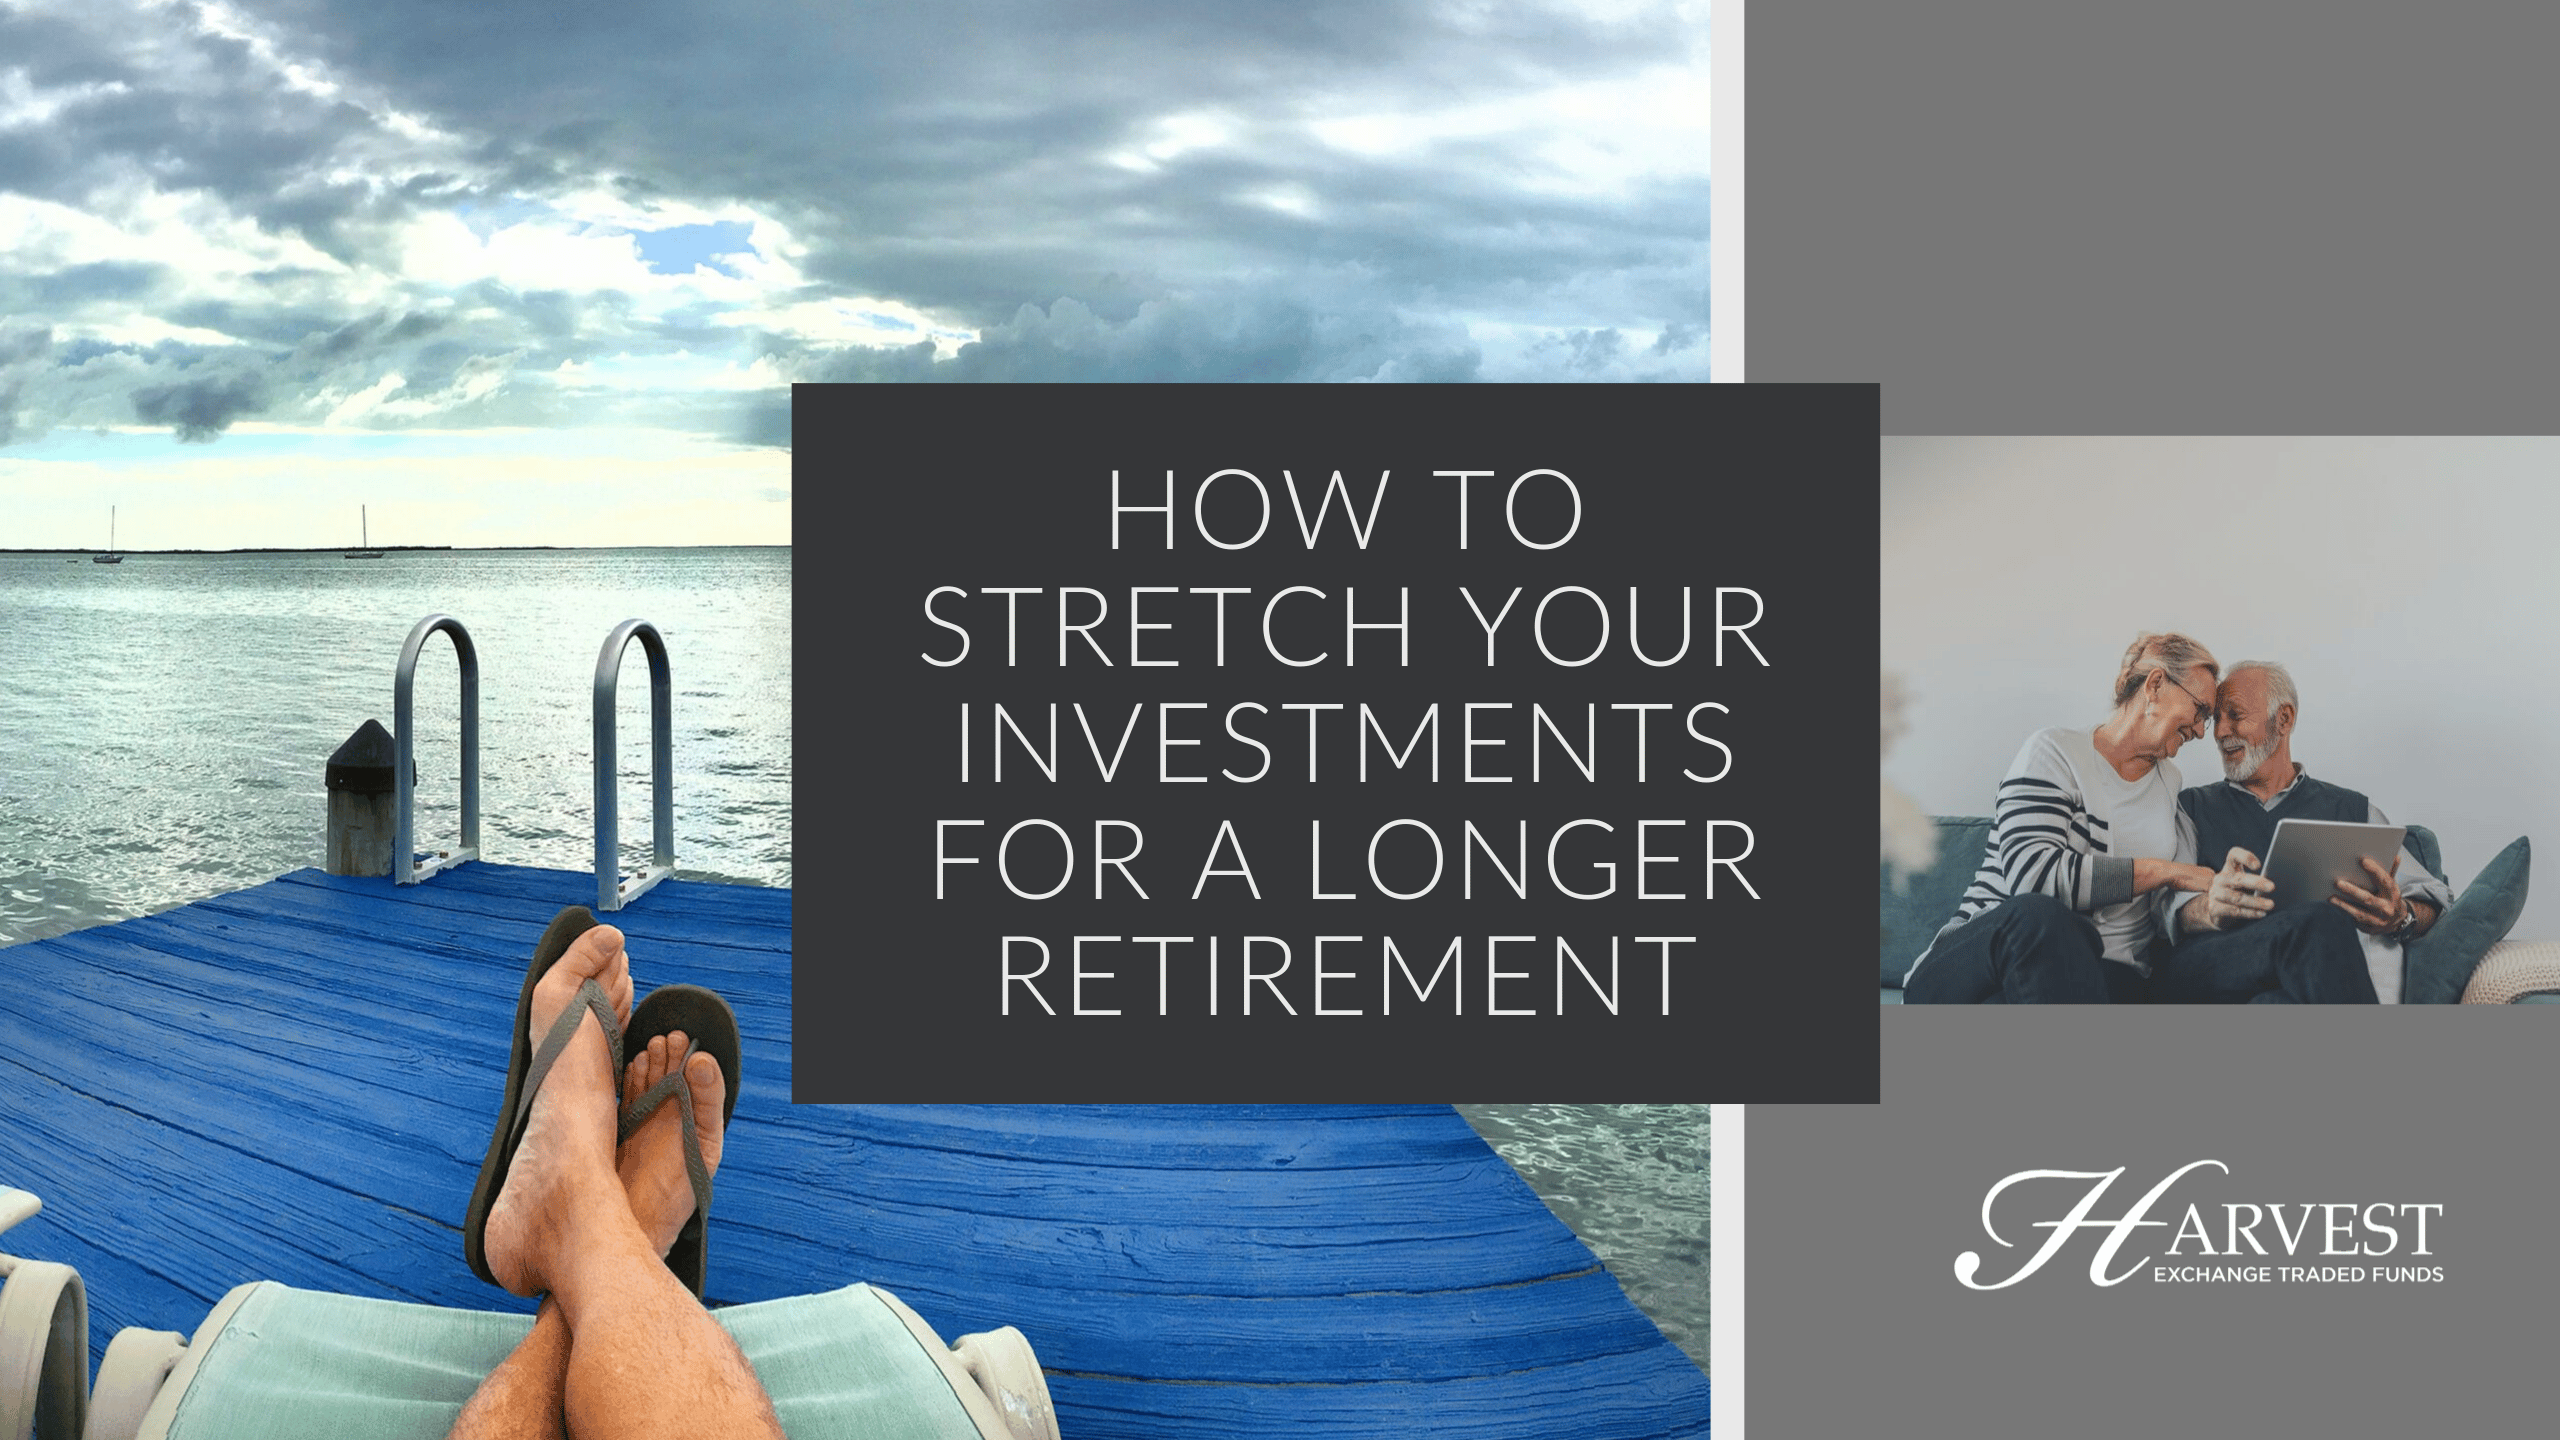 How to stretch your investments for a longer retirement